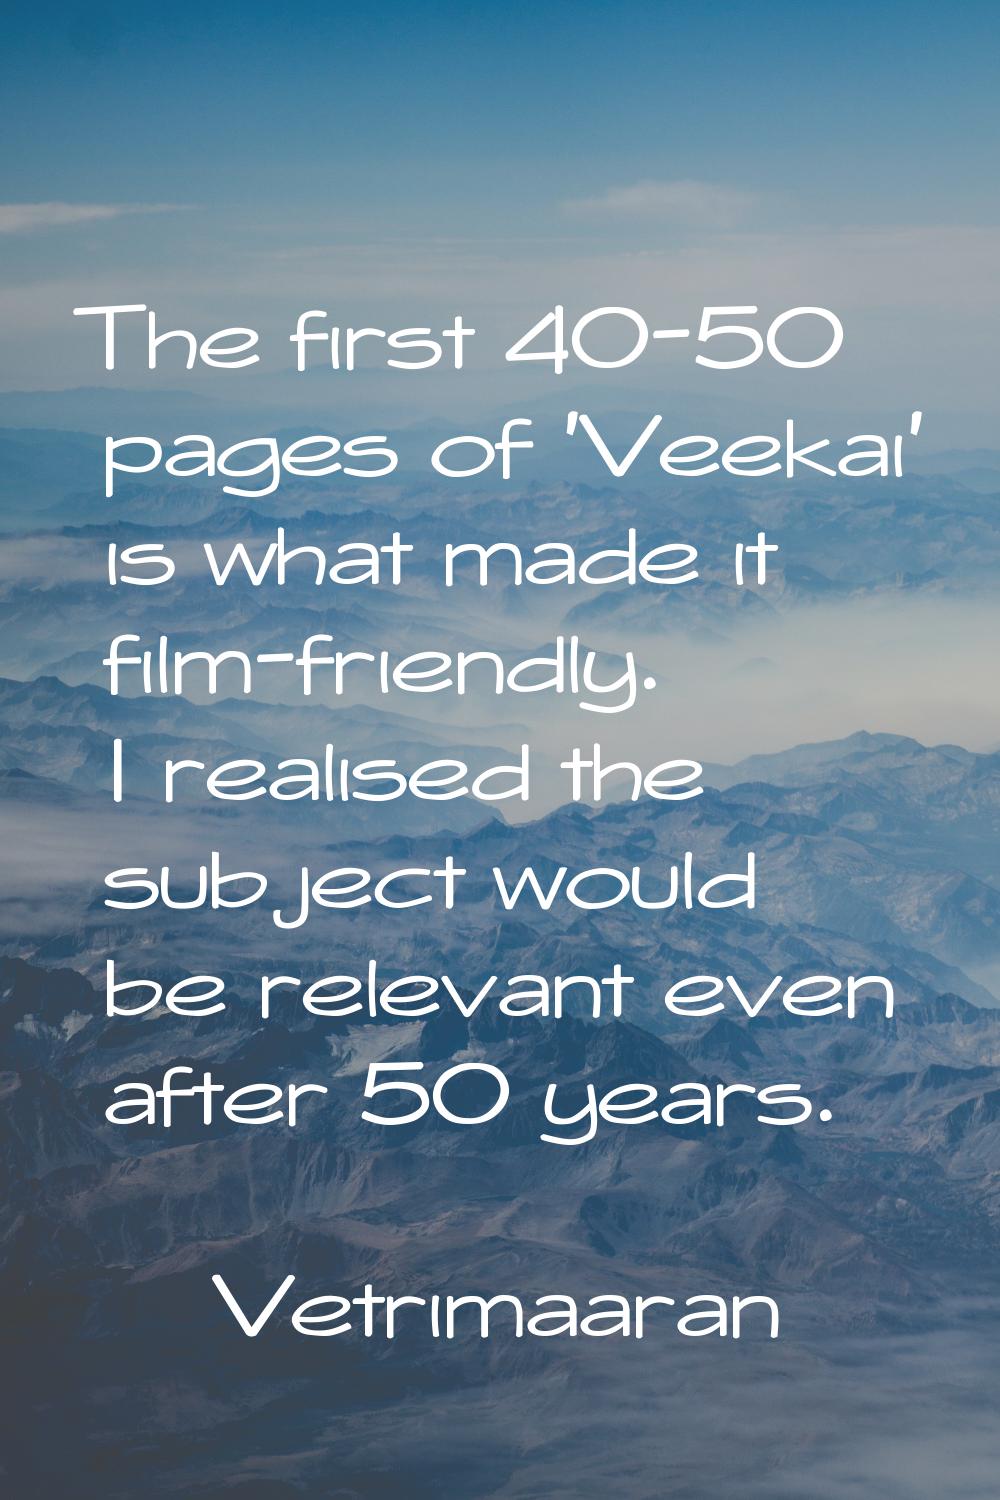 The first 40-50 pages of ‘Veekai' is what made it film-friendly. I realised the subject would be re